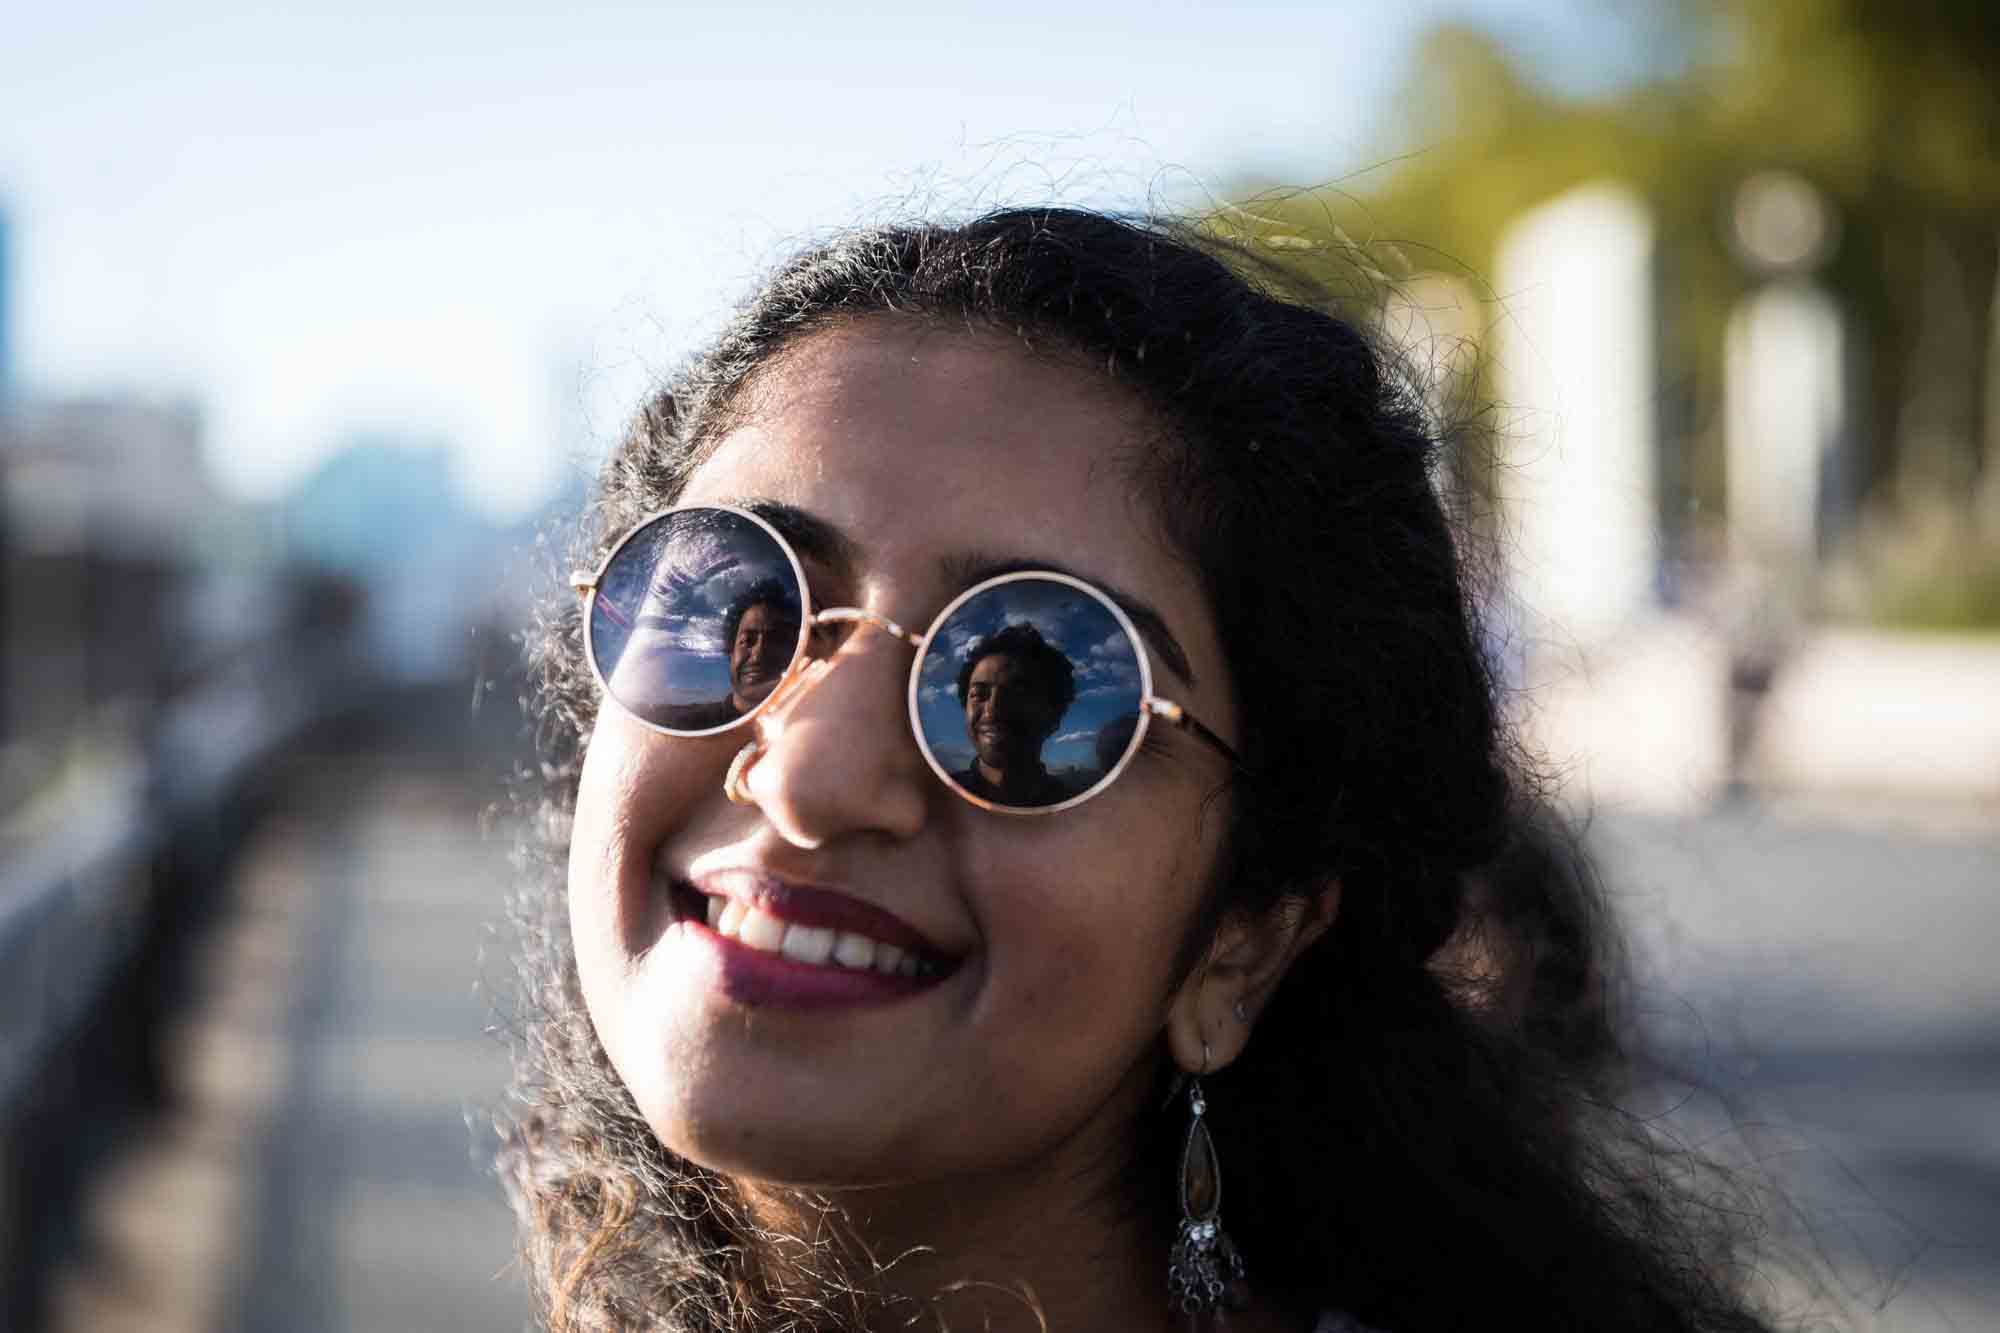 Smiling woman with reflection of fiance in her sunglasses